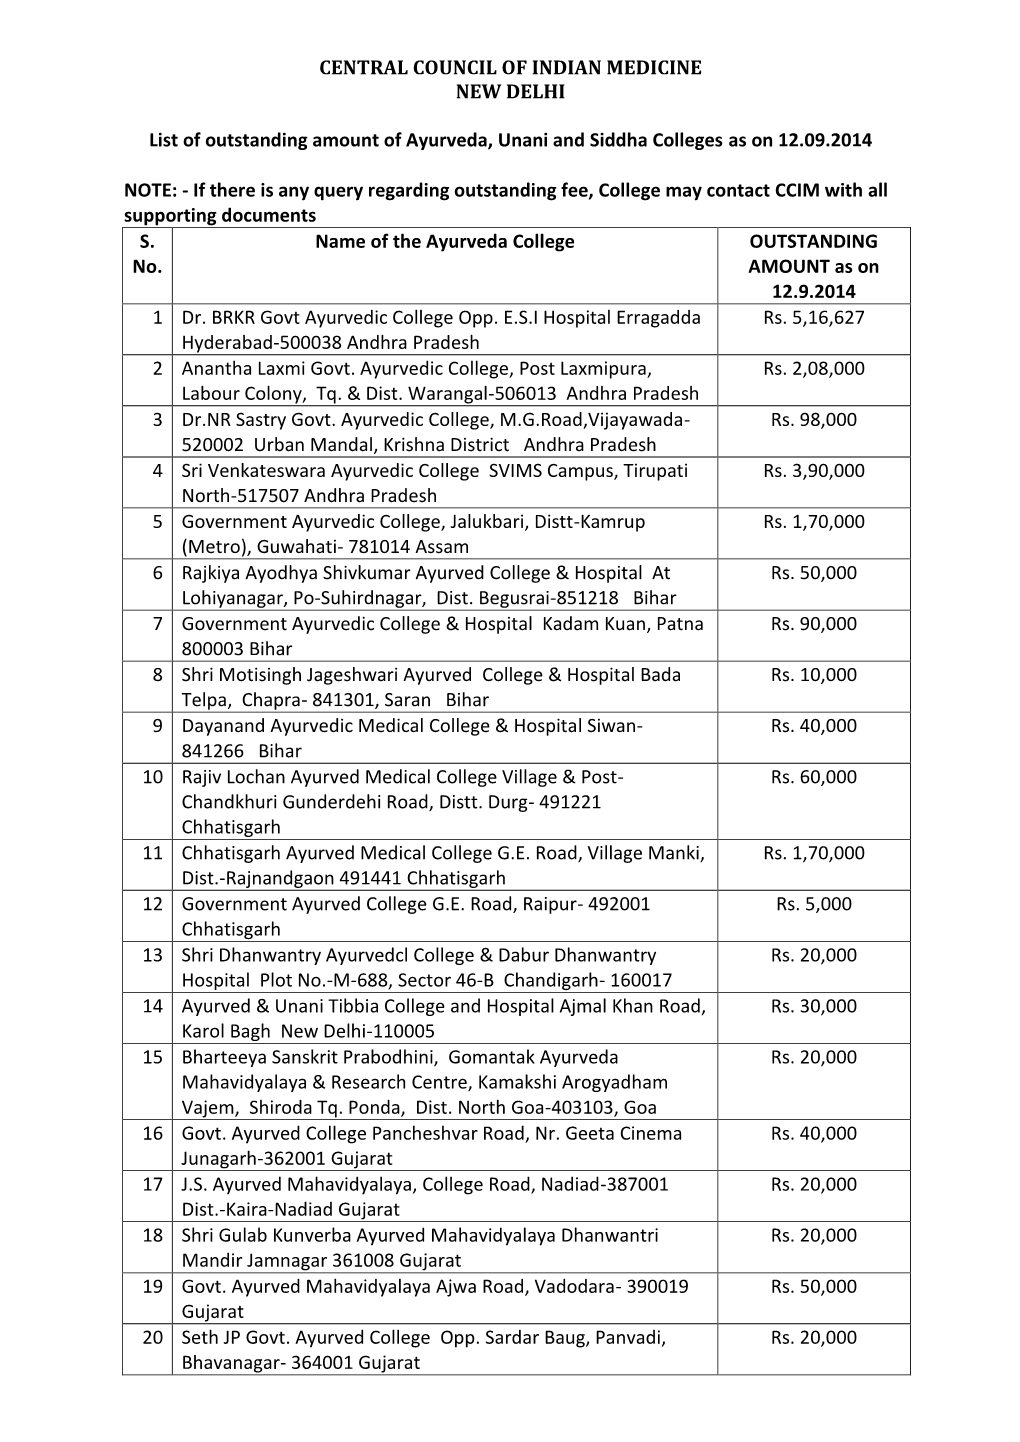 CENTRAL COUNCIL of INDIAN MEDICINE NEW DELHI List of Outstanding Amount of Ayurveda, Unani and Siddha Colleges As on 12.09.2014